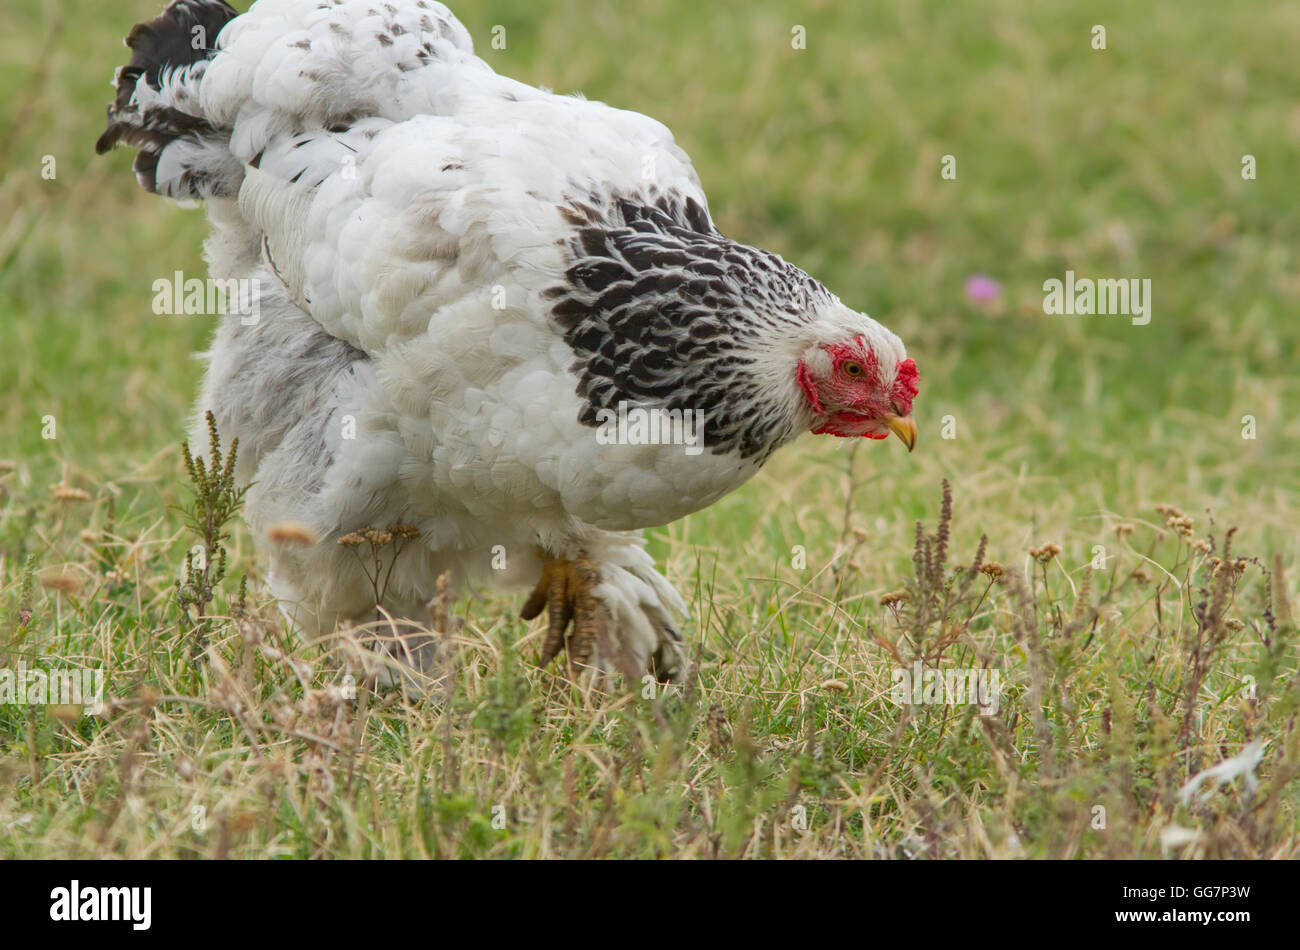 A free range Rooster Stock Photo